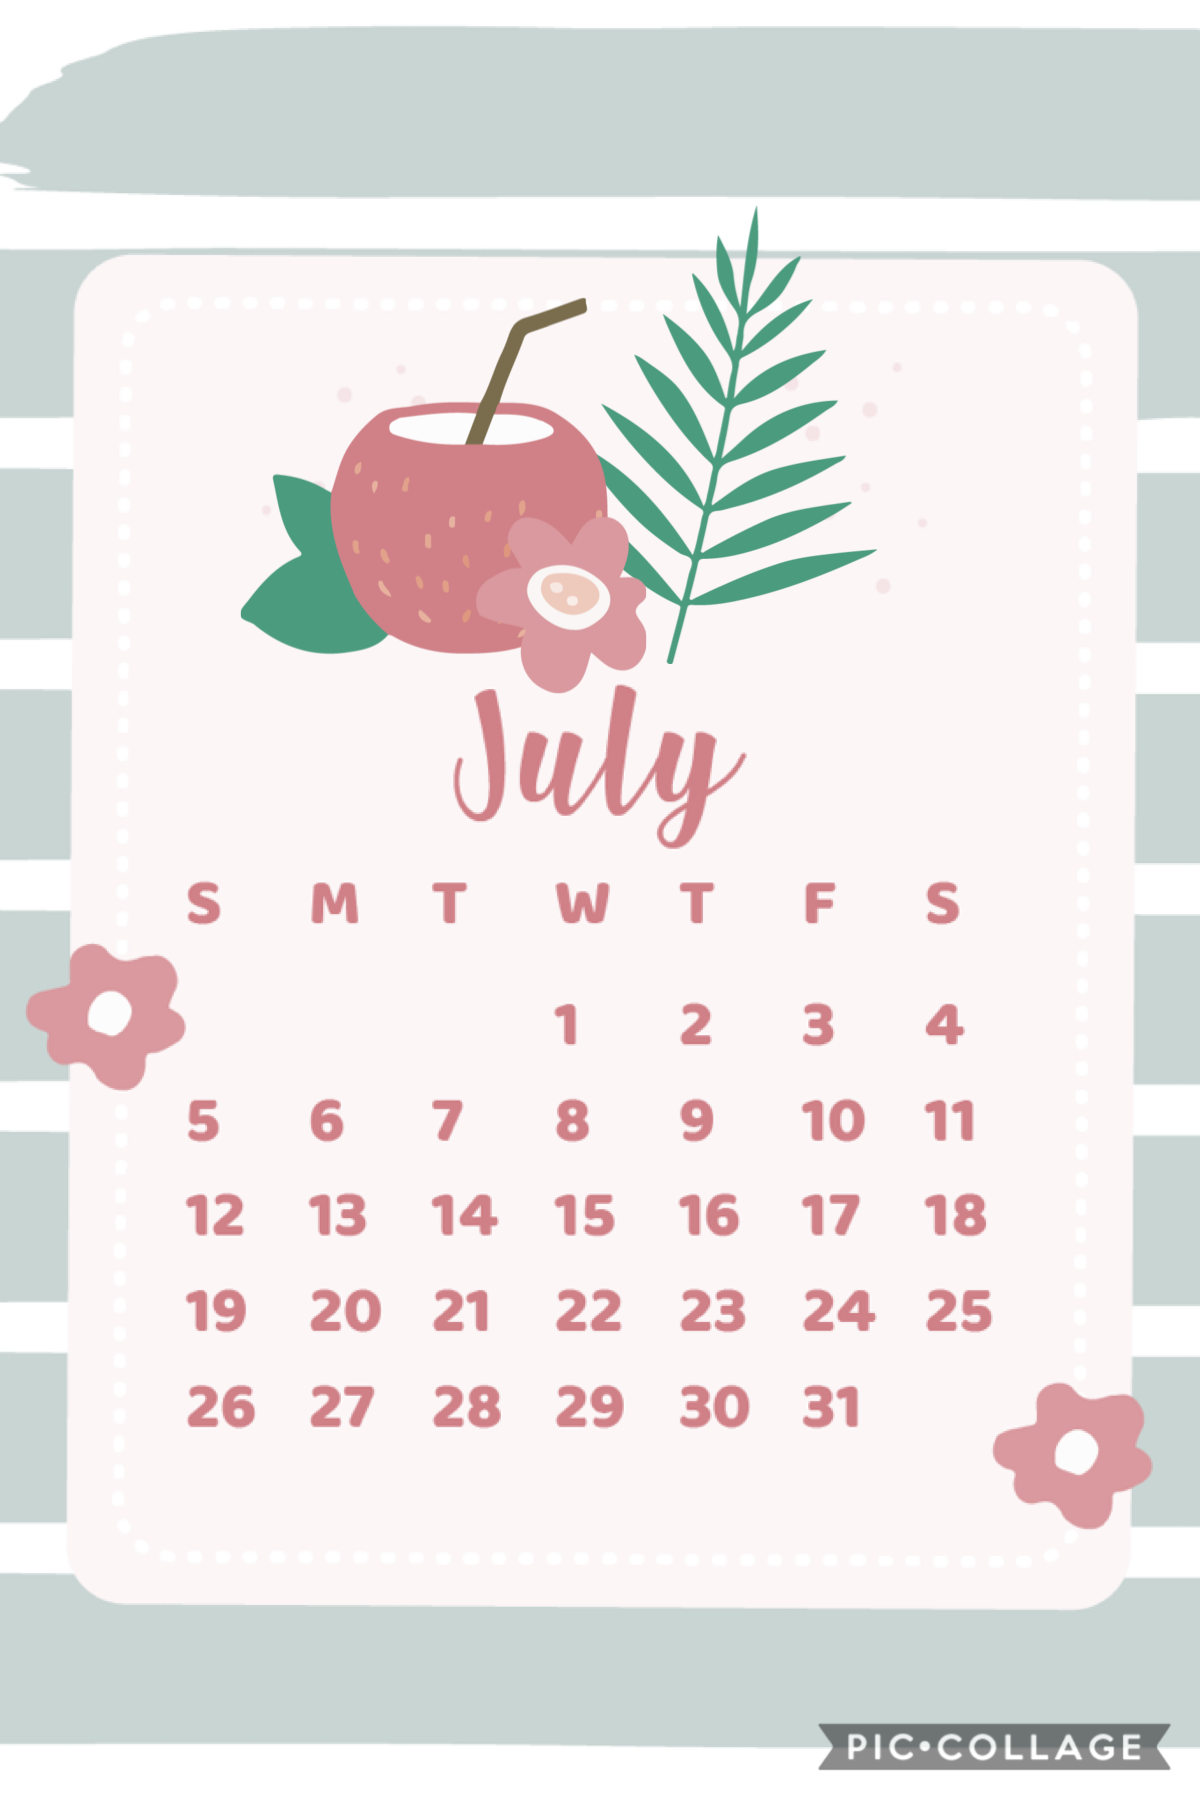 Welcome to July 